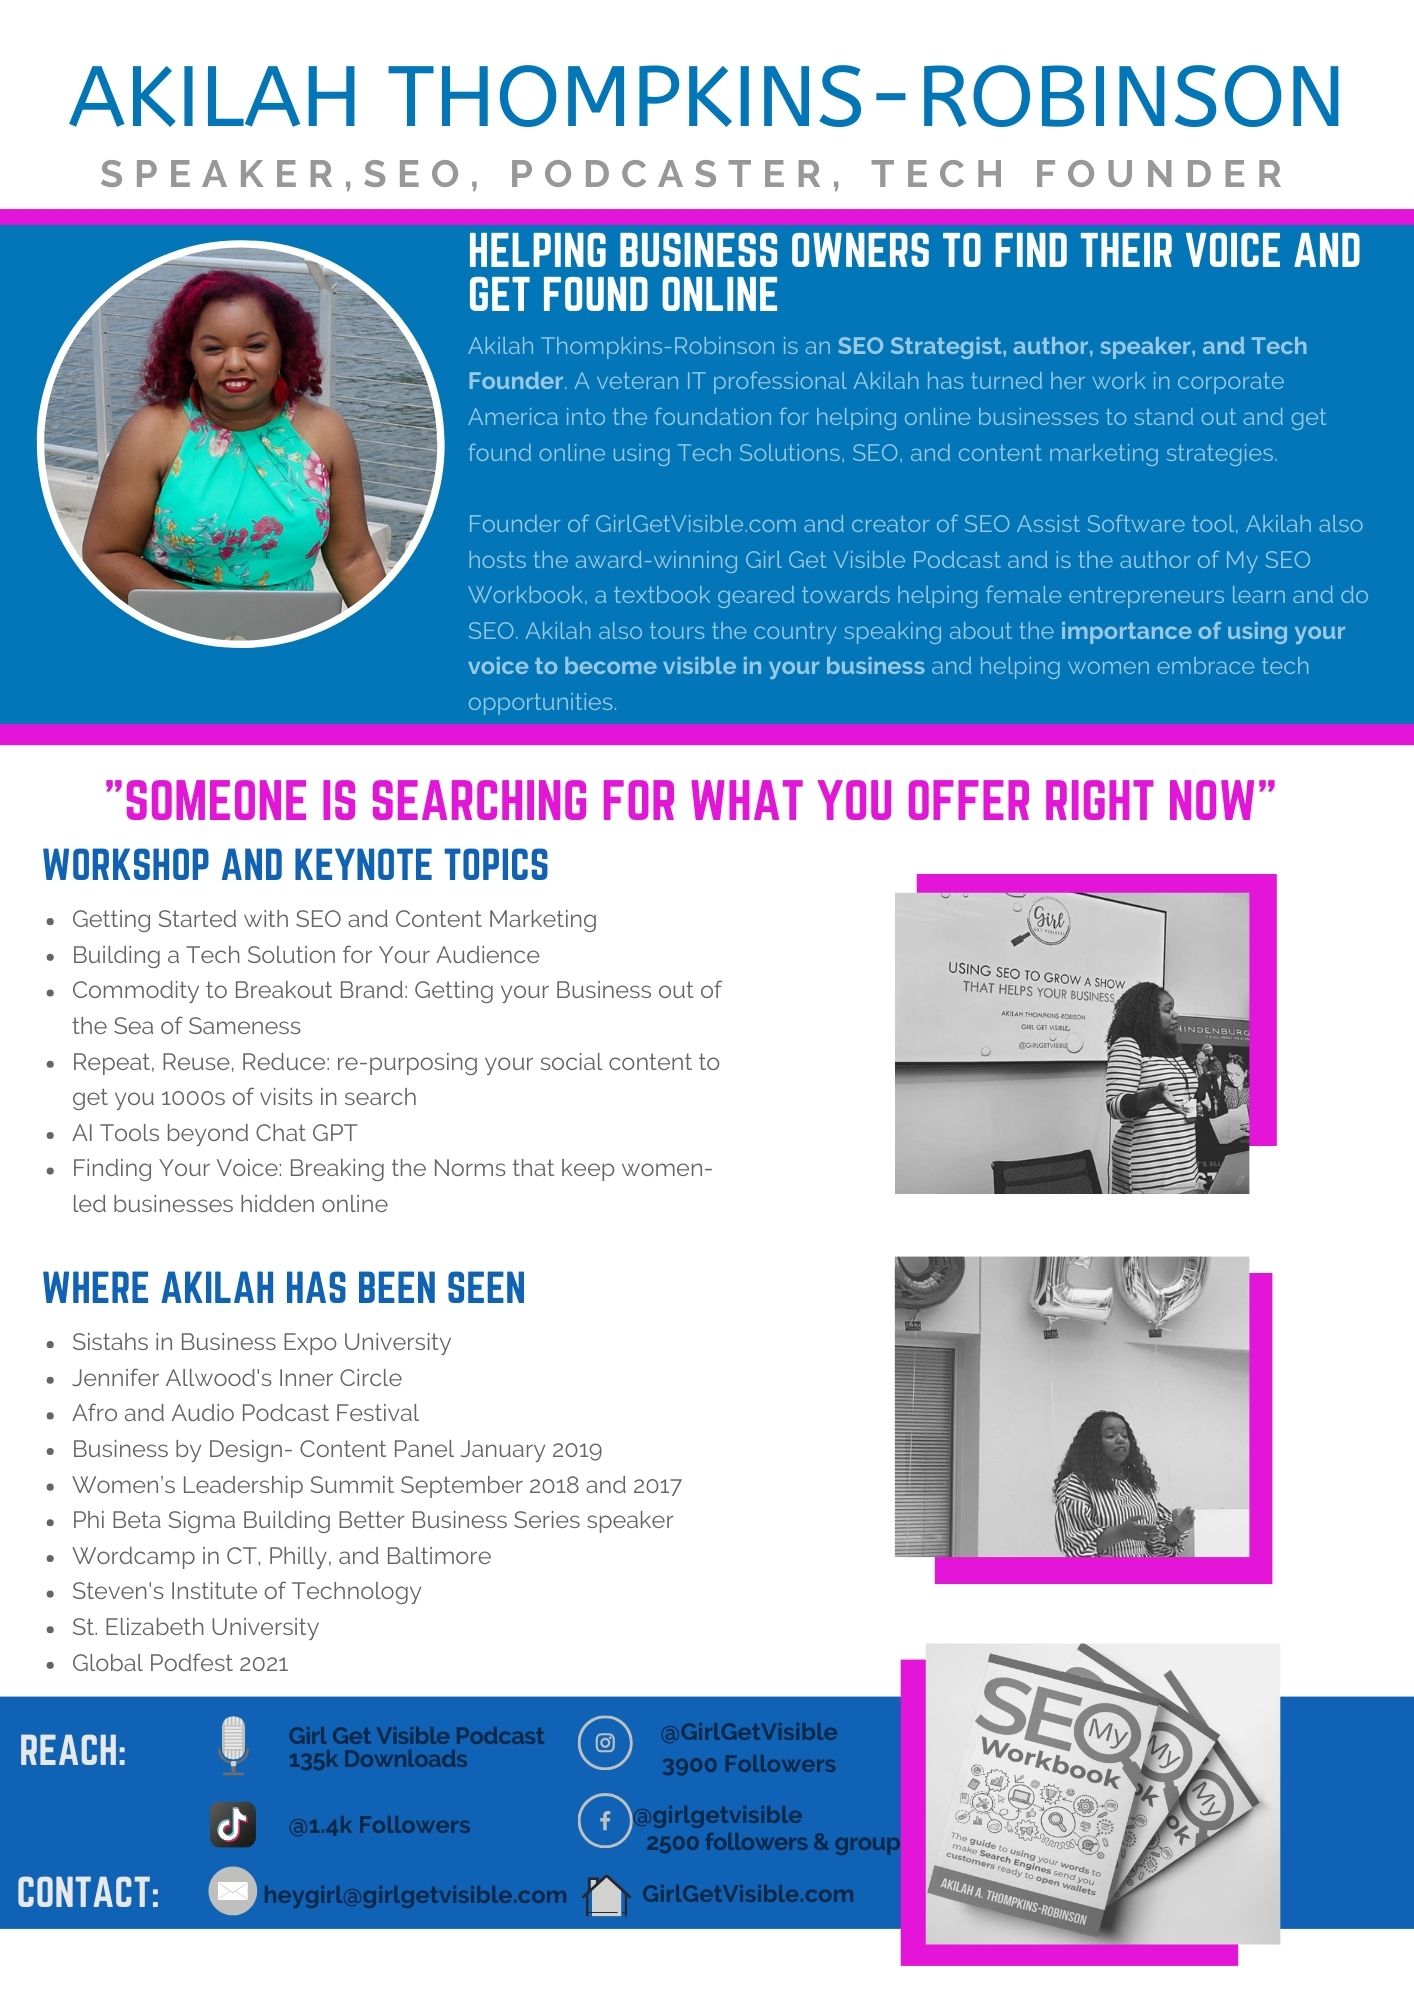 Women in SEO and Technology speaker Akilah Thompkins-Robinson located in New Jersey available to speak to conference, corporate, college university audience on various topics around women in technology, saas founder, podcasting, seo, content marketing and building your online thought leadership